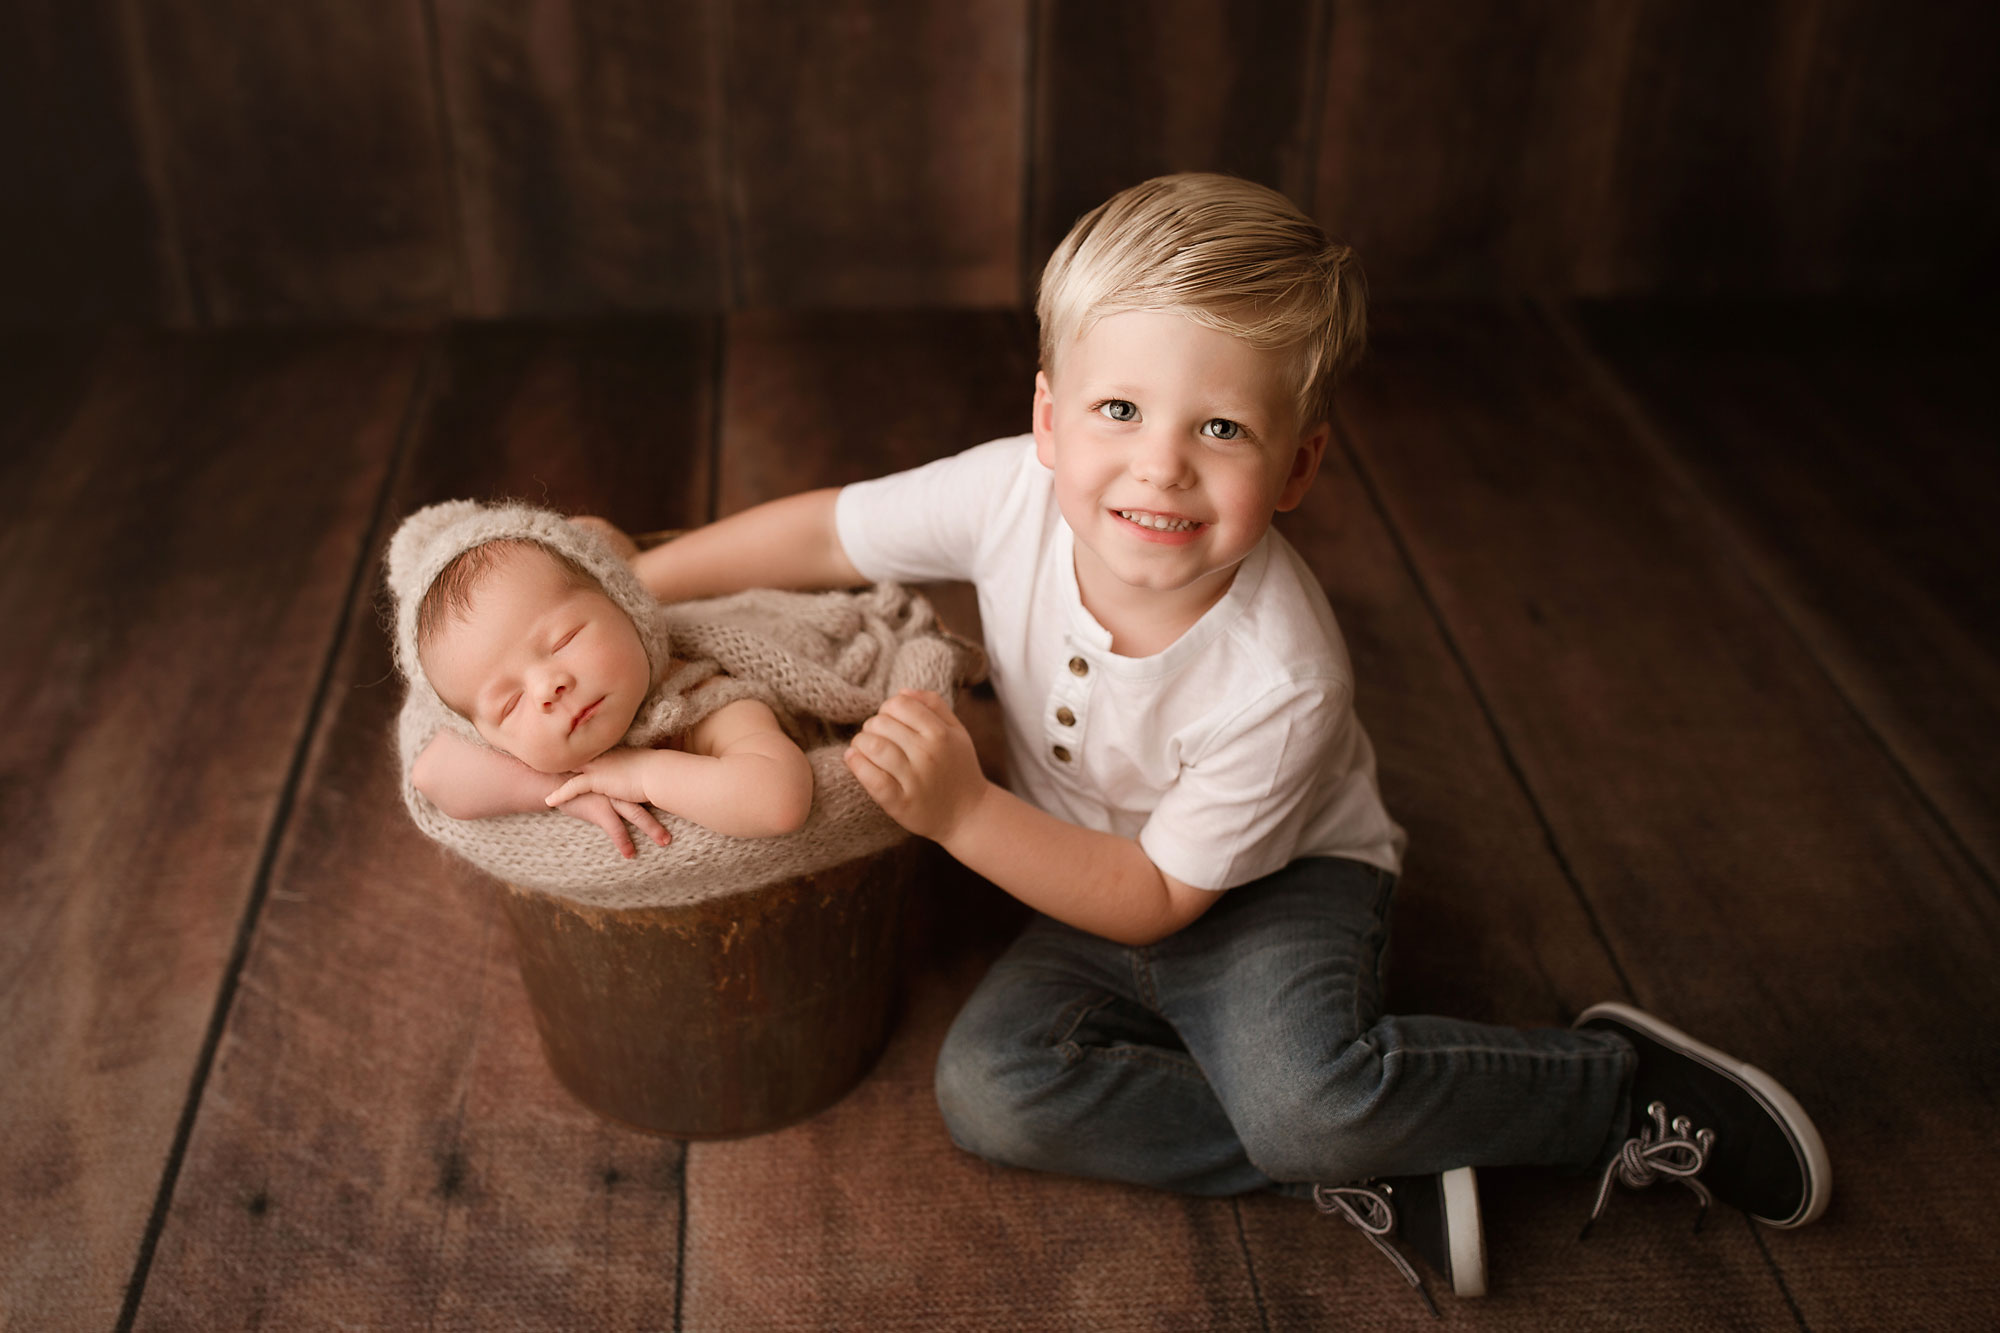 newborn and sibling photographer new jersey, little boy seated next to baby sleeping in rustic bucket on wood backdrop